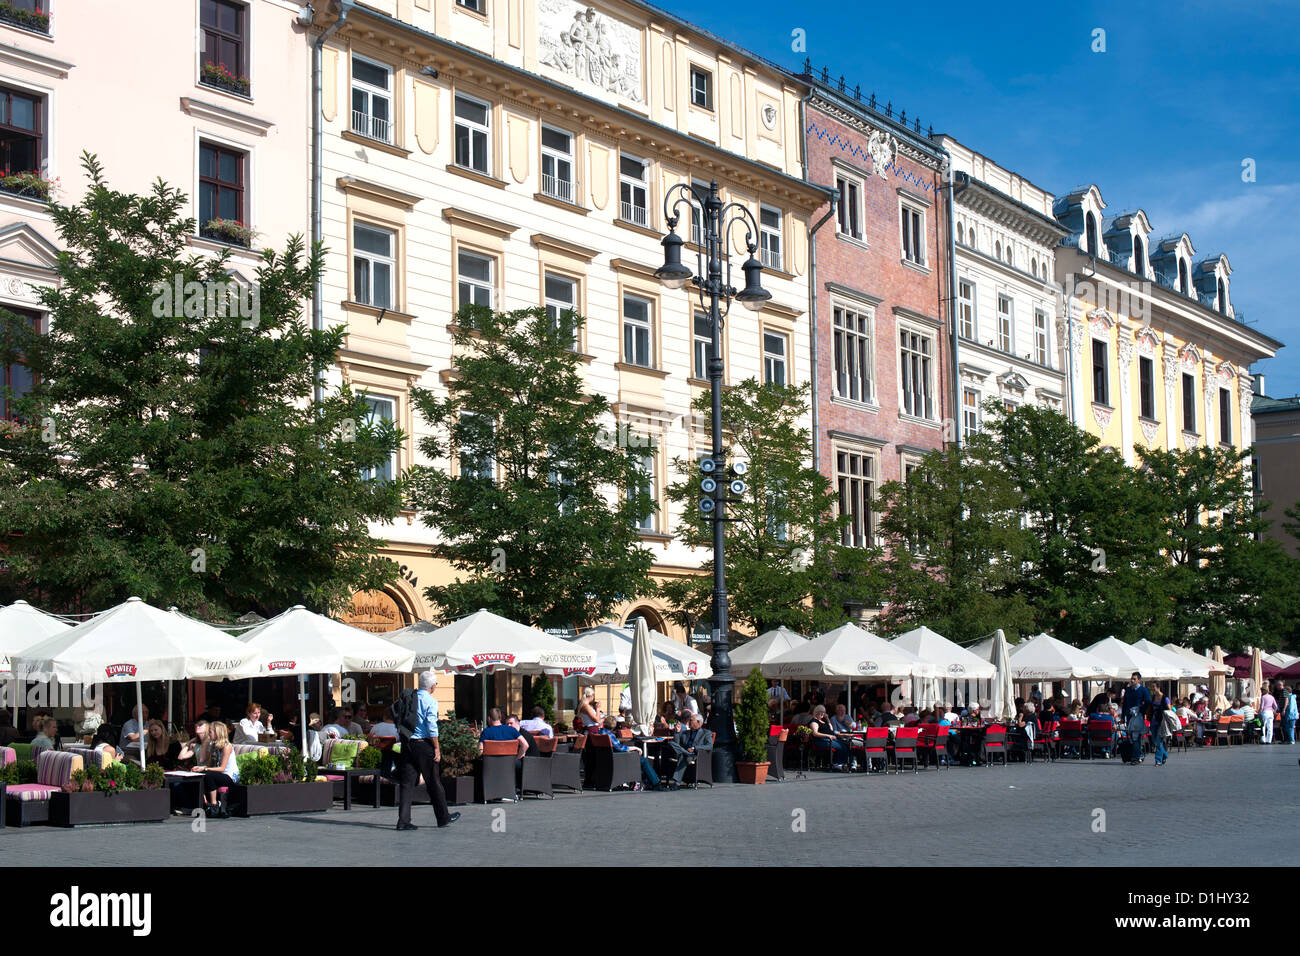 Buildings on Rynek Glówny, the main town square in Krakow in southern Poland. Stock Photo